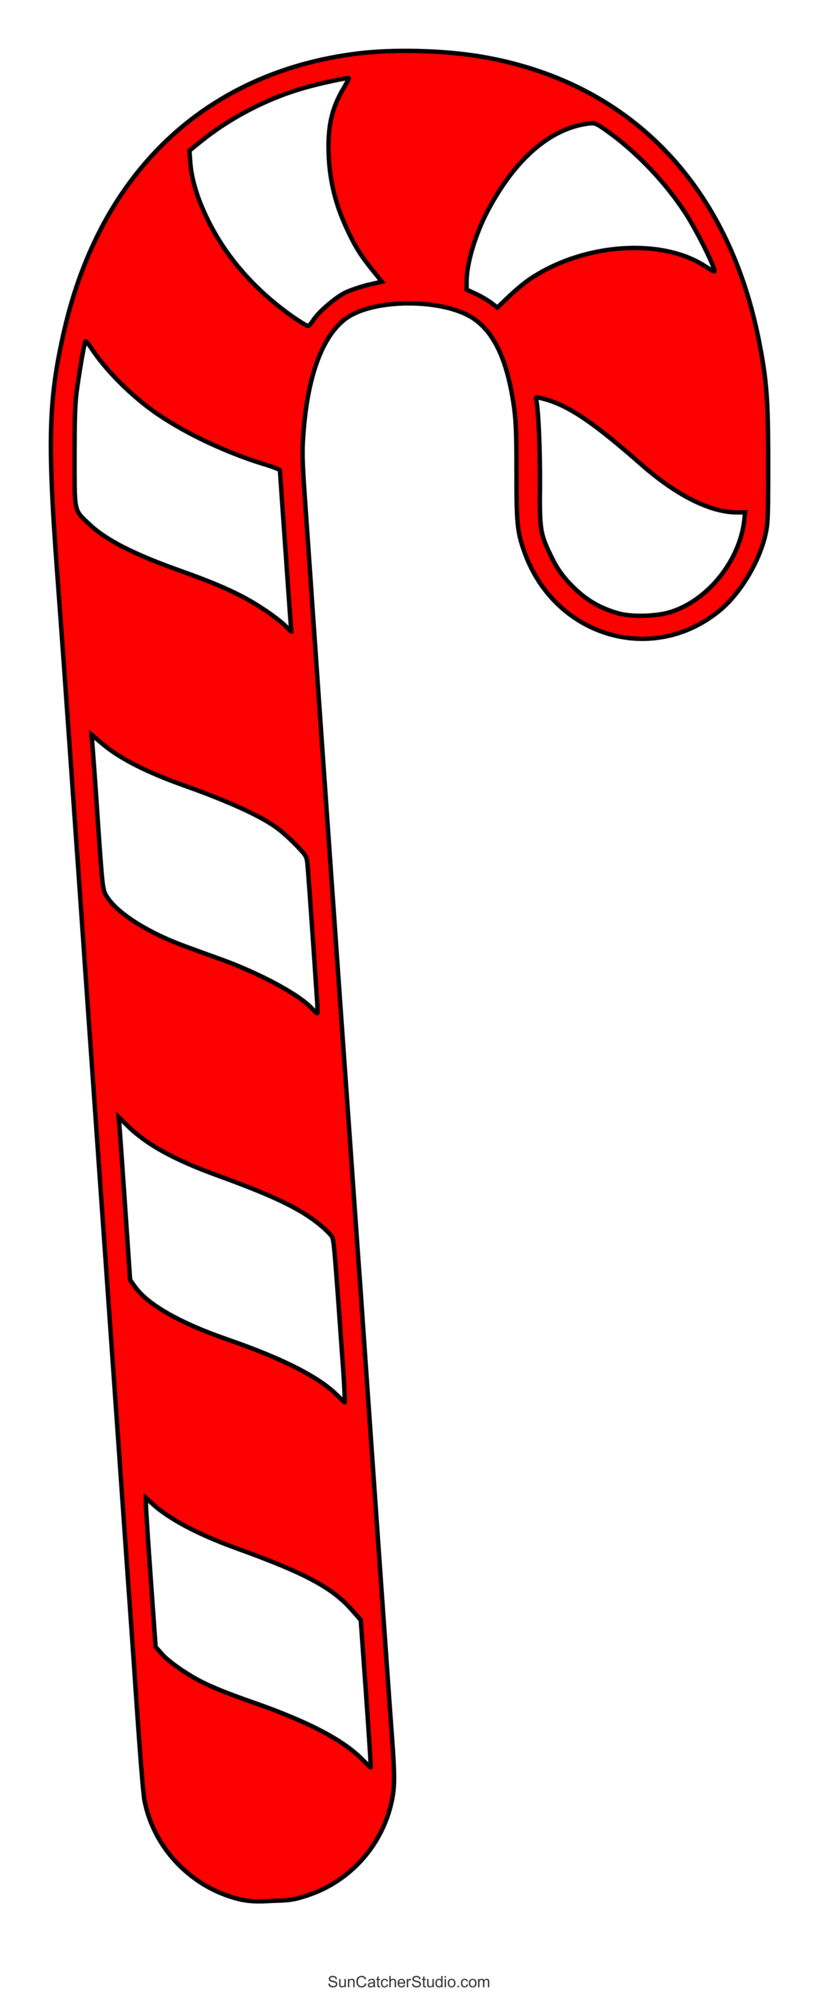 Candy cane templates free printable patterns stencils â diy projects patterns monograms designs templates